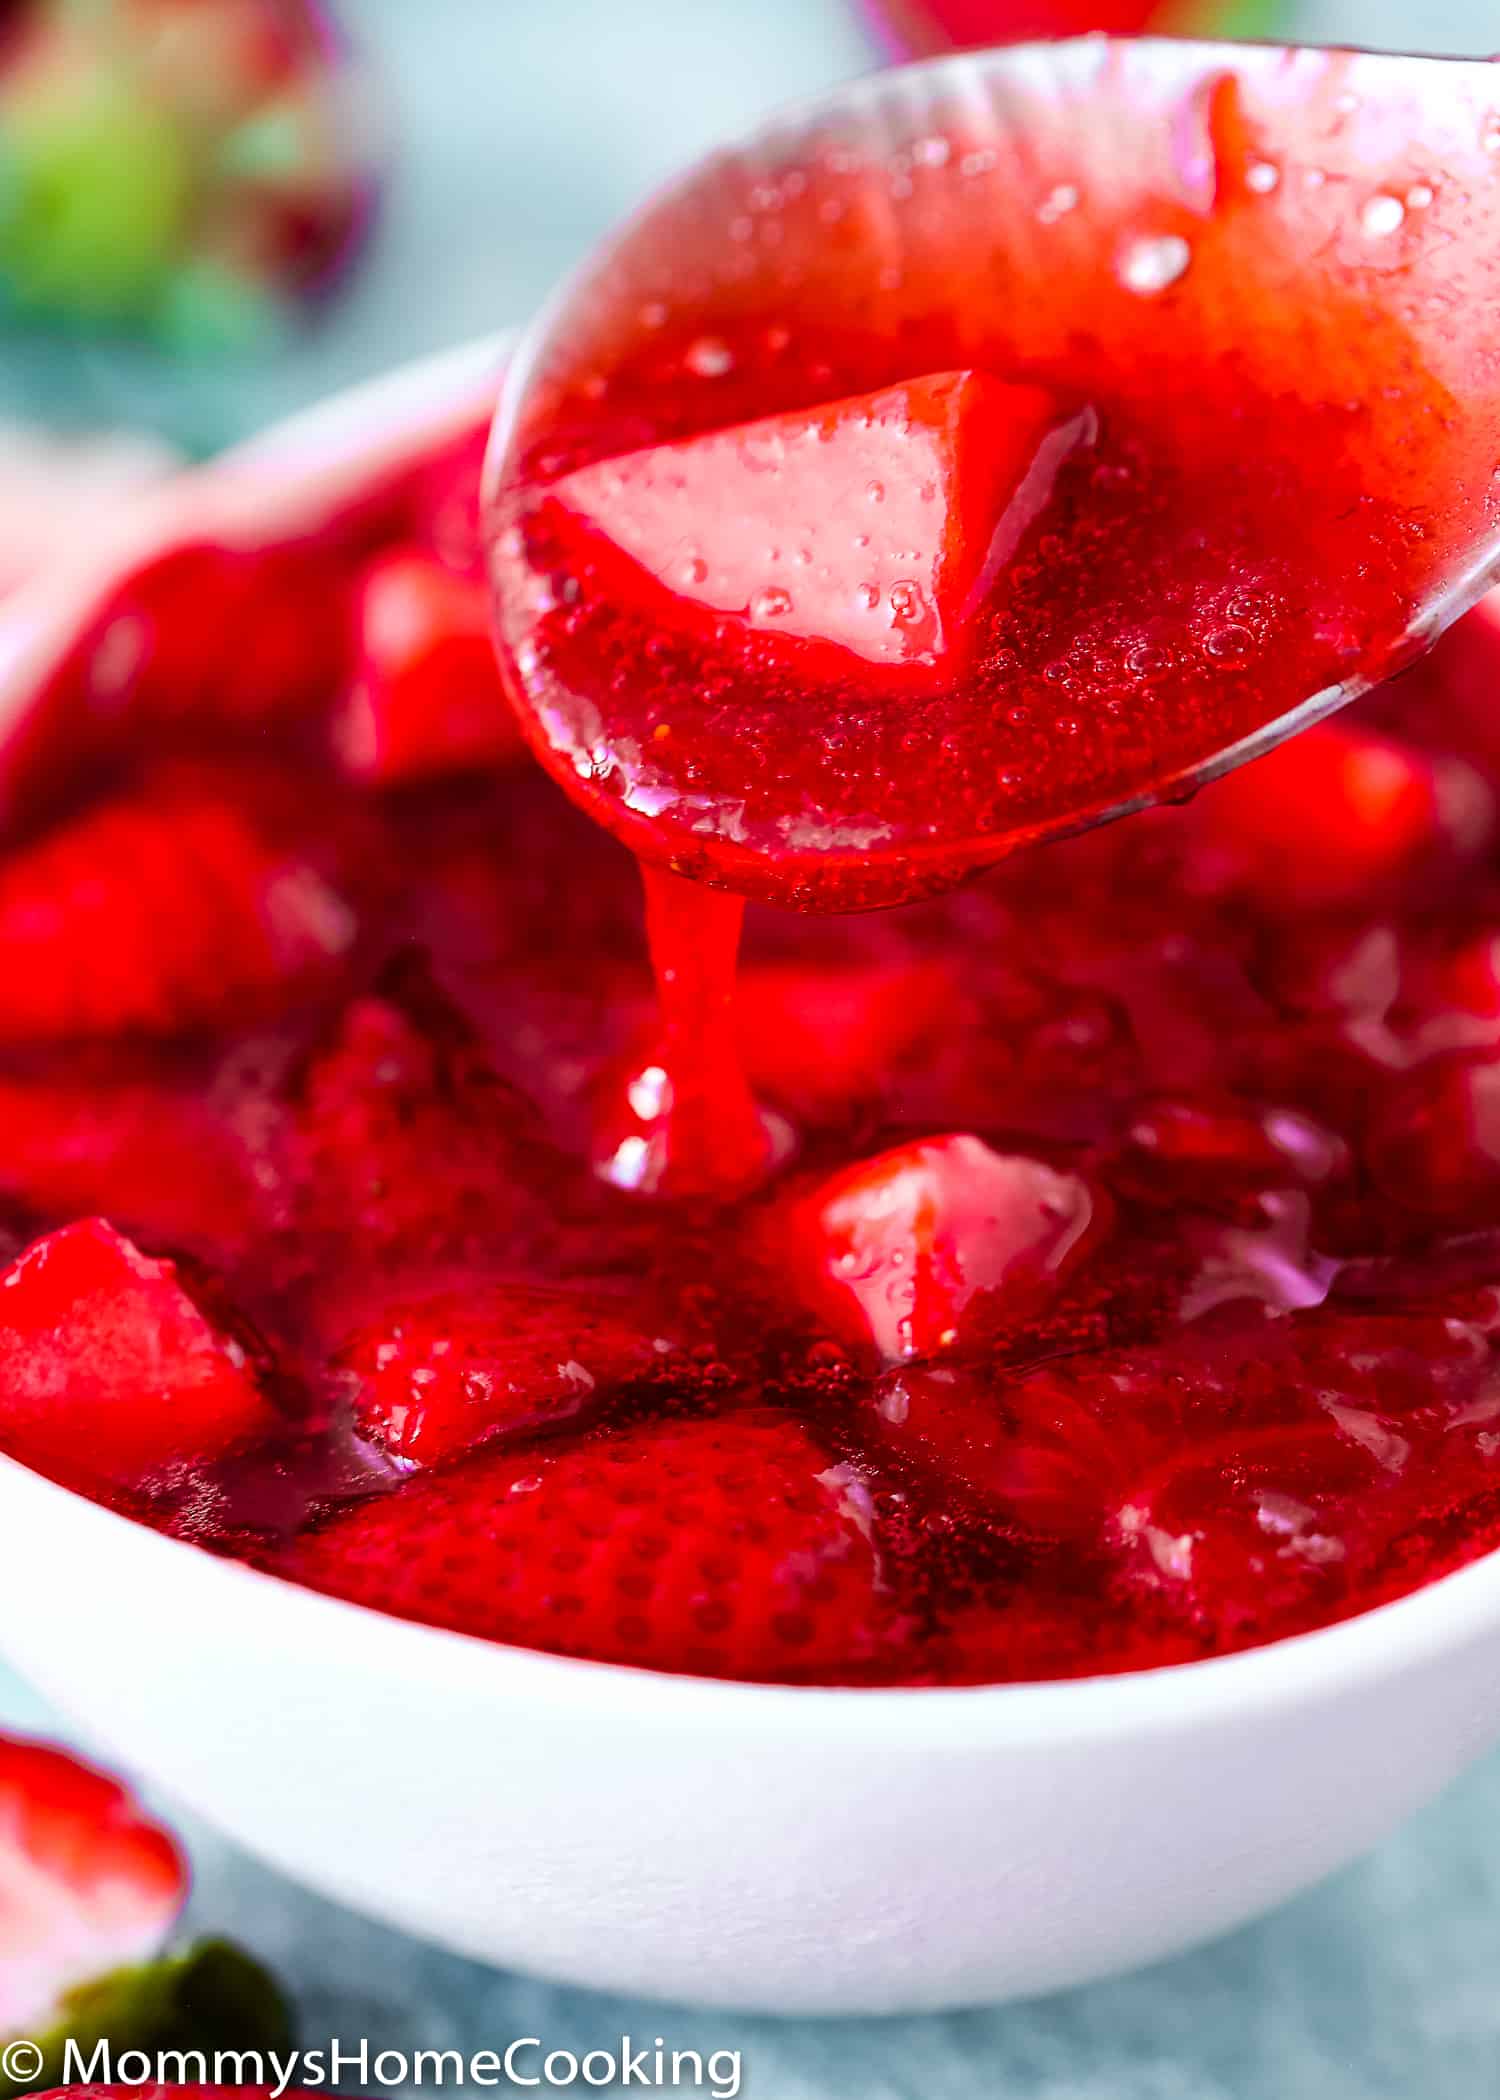 strawberry sauce/topping  in a spoon close-up